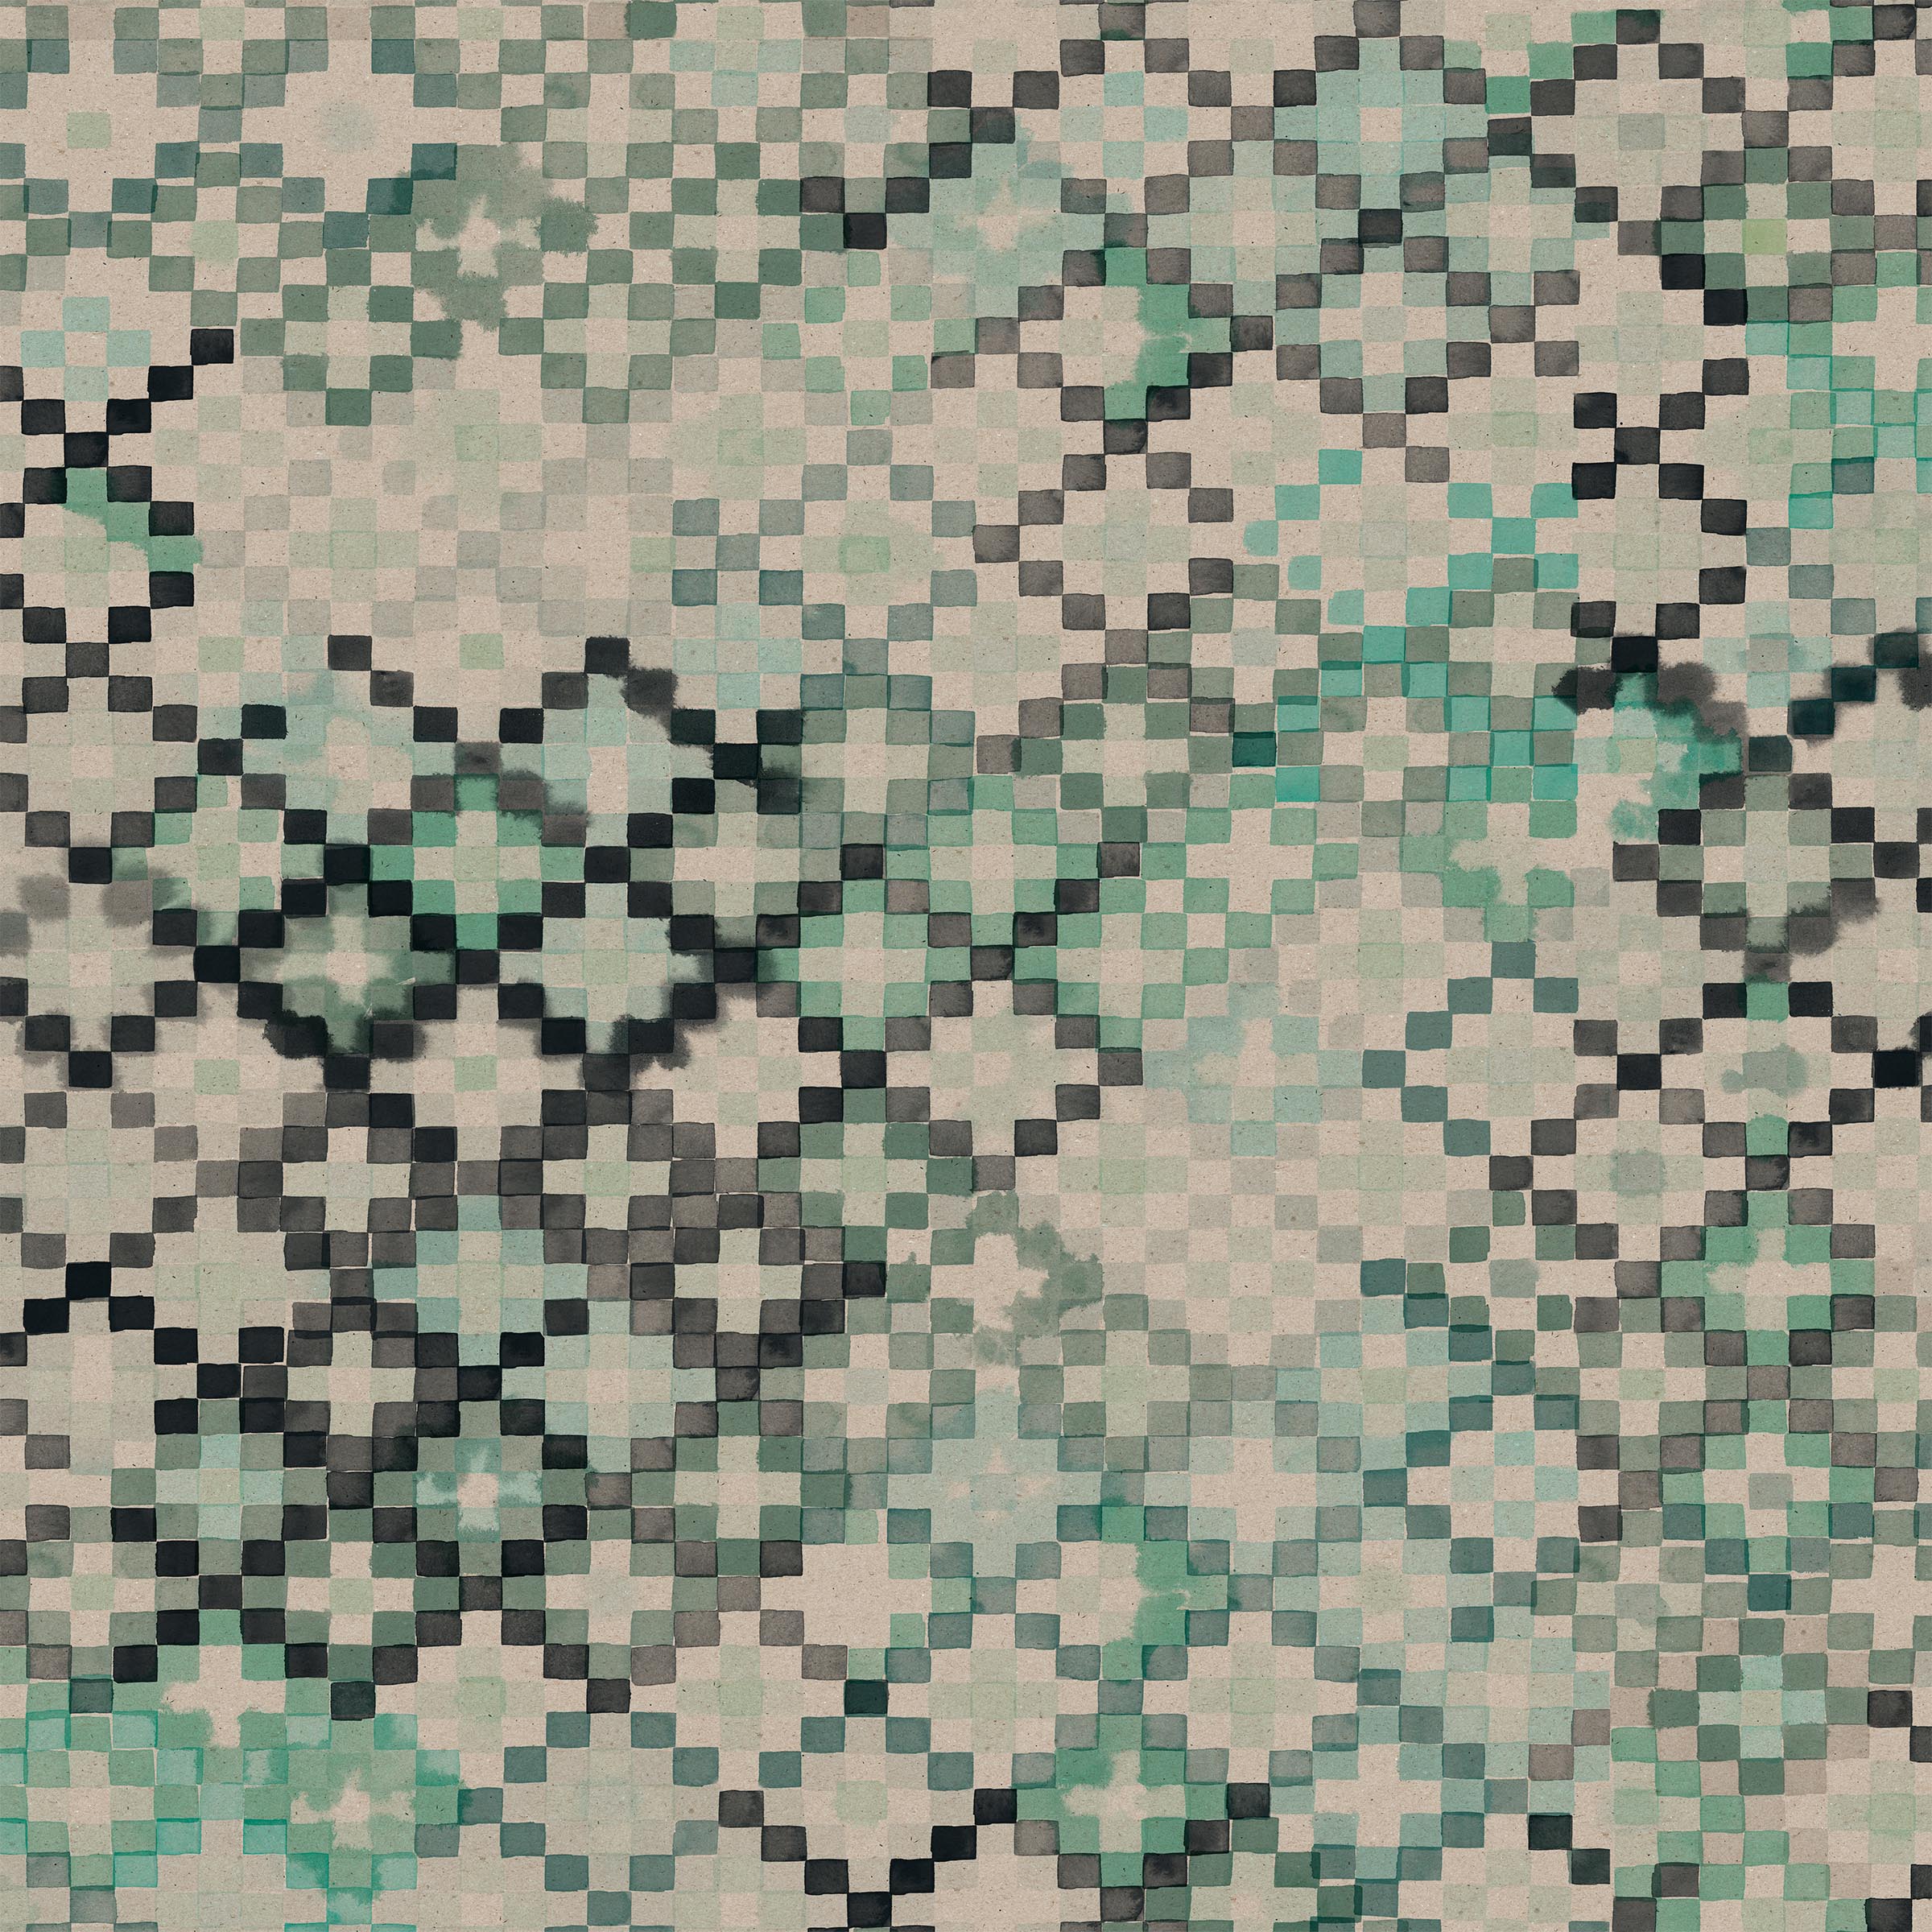 Detail of wallpaper in a diamond checked pattern in shades of cream, gray and green.